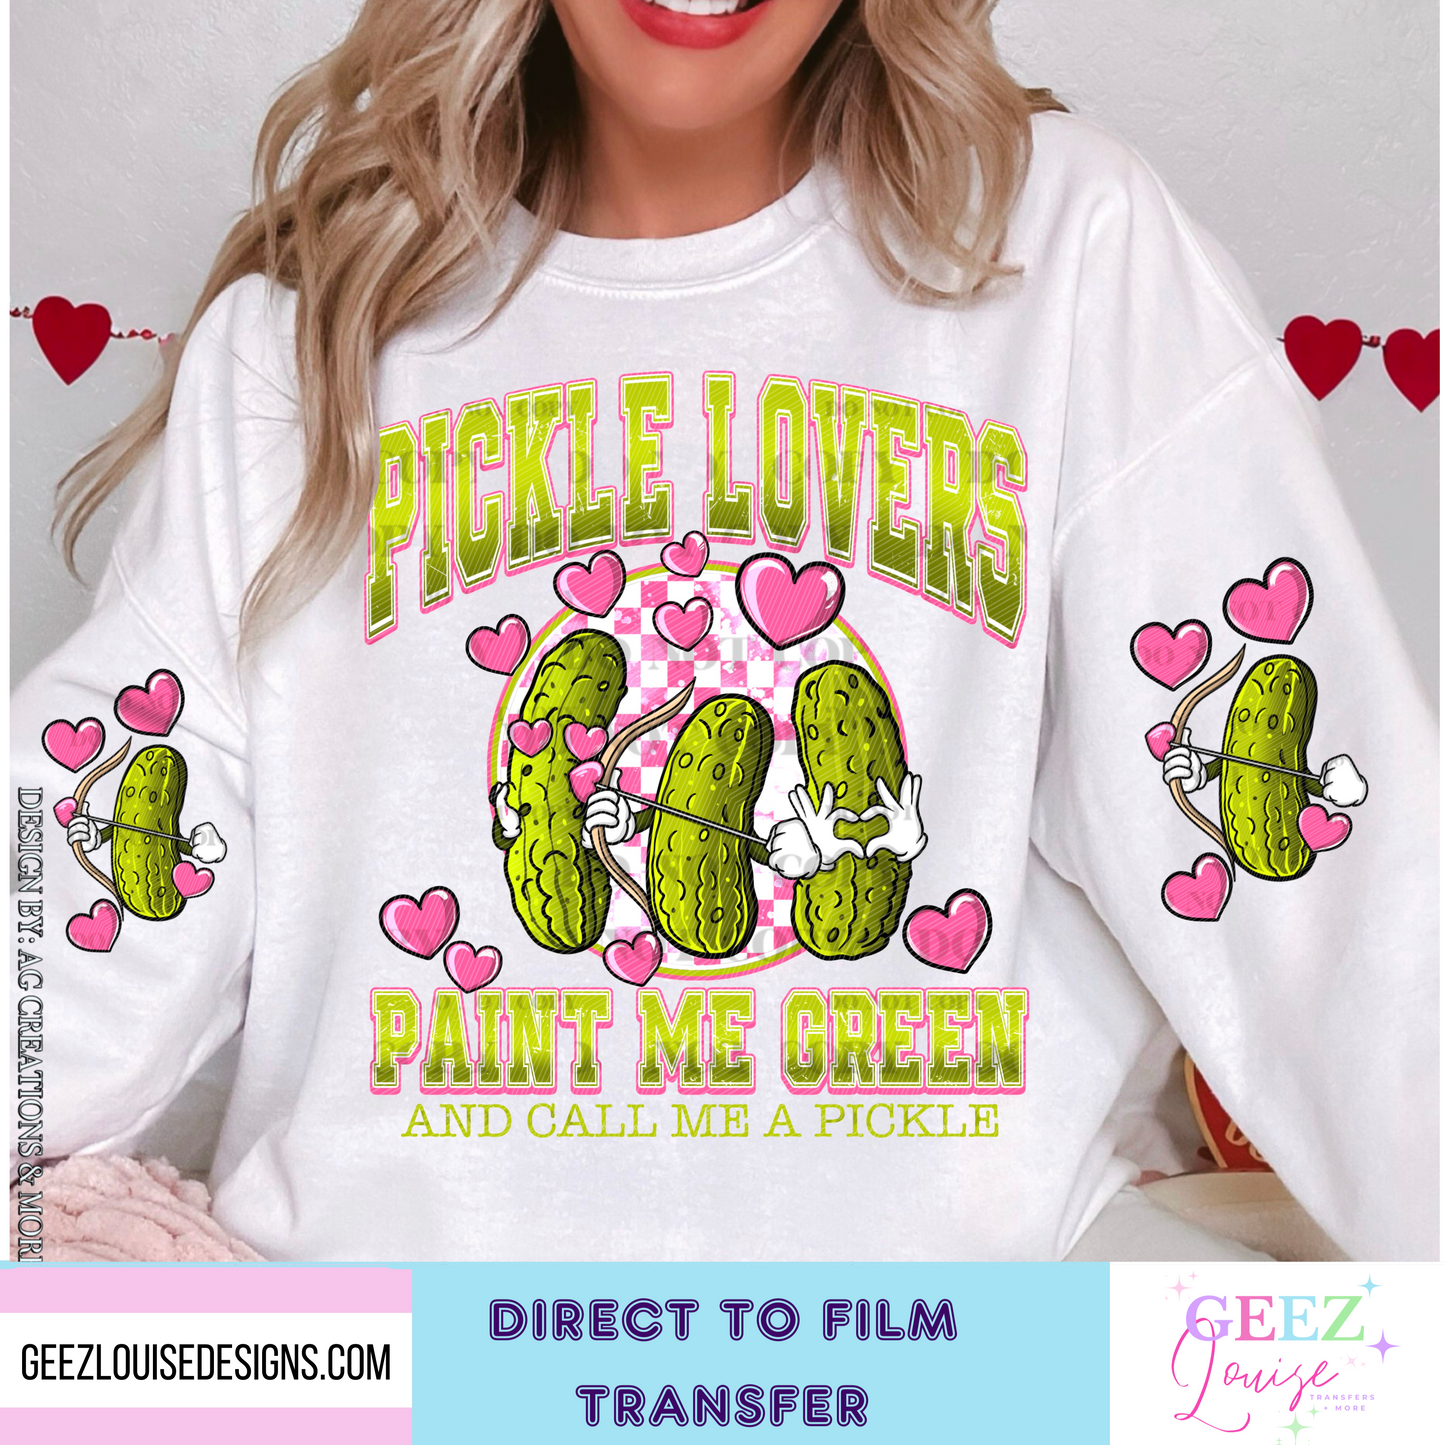 Pickle lovers - Direct to Film Transfer - made to order